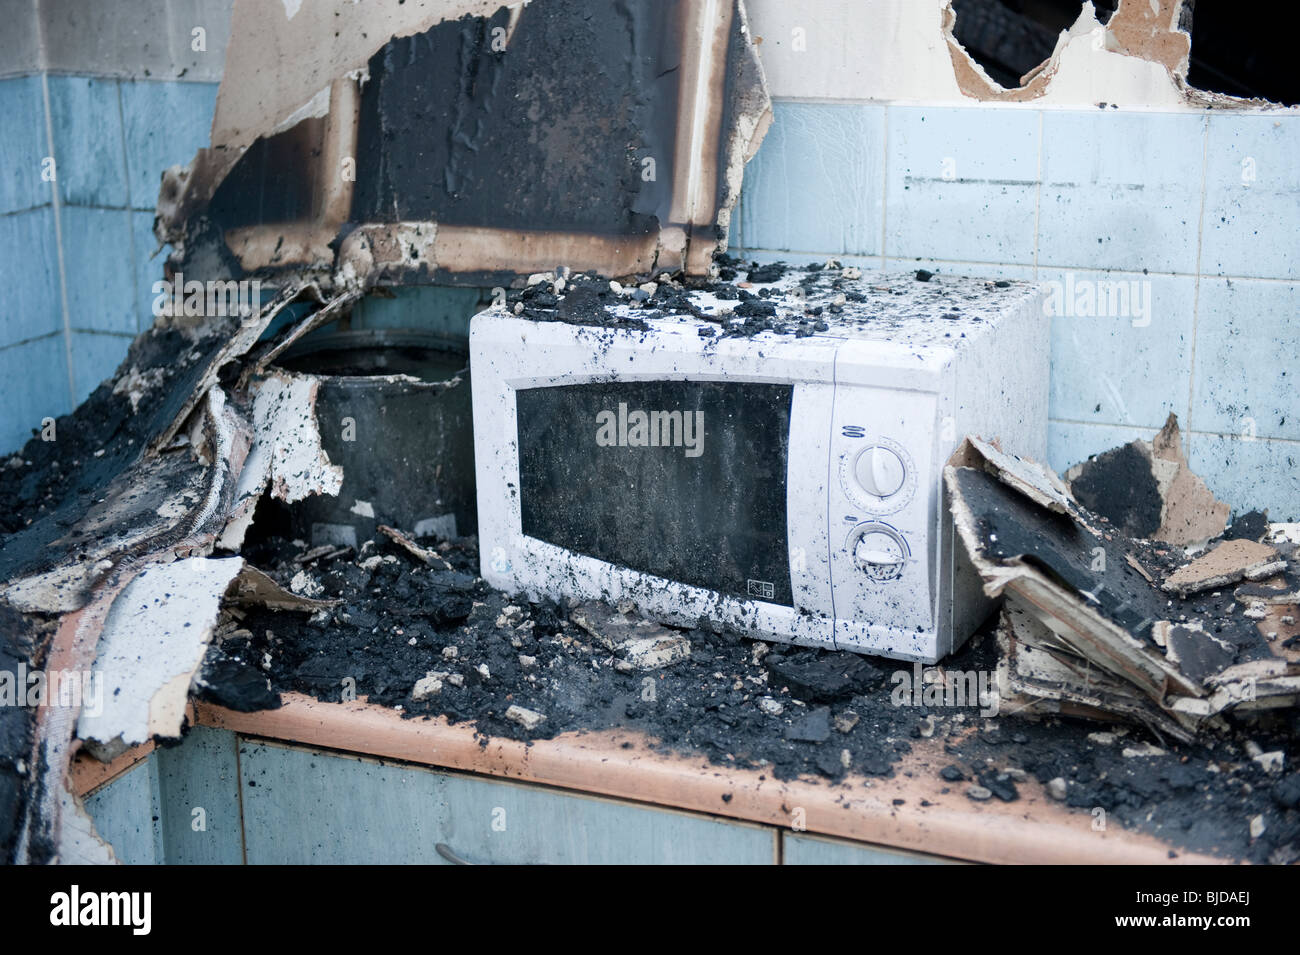 Melted microwave oven following kitchen fire Stock Photo